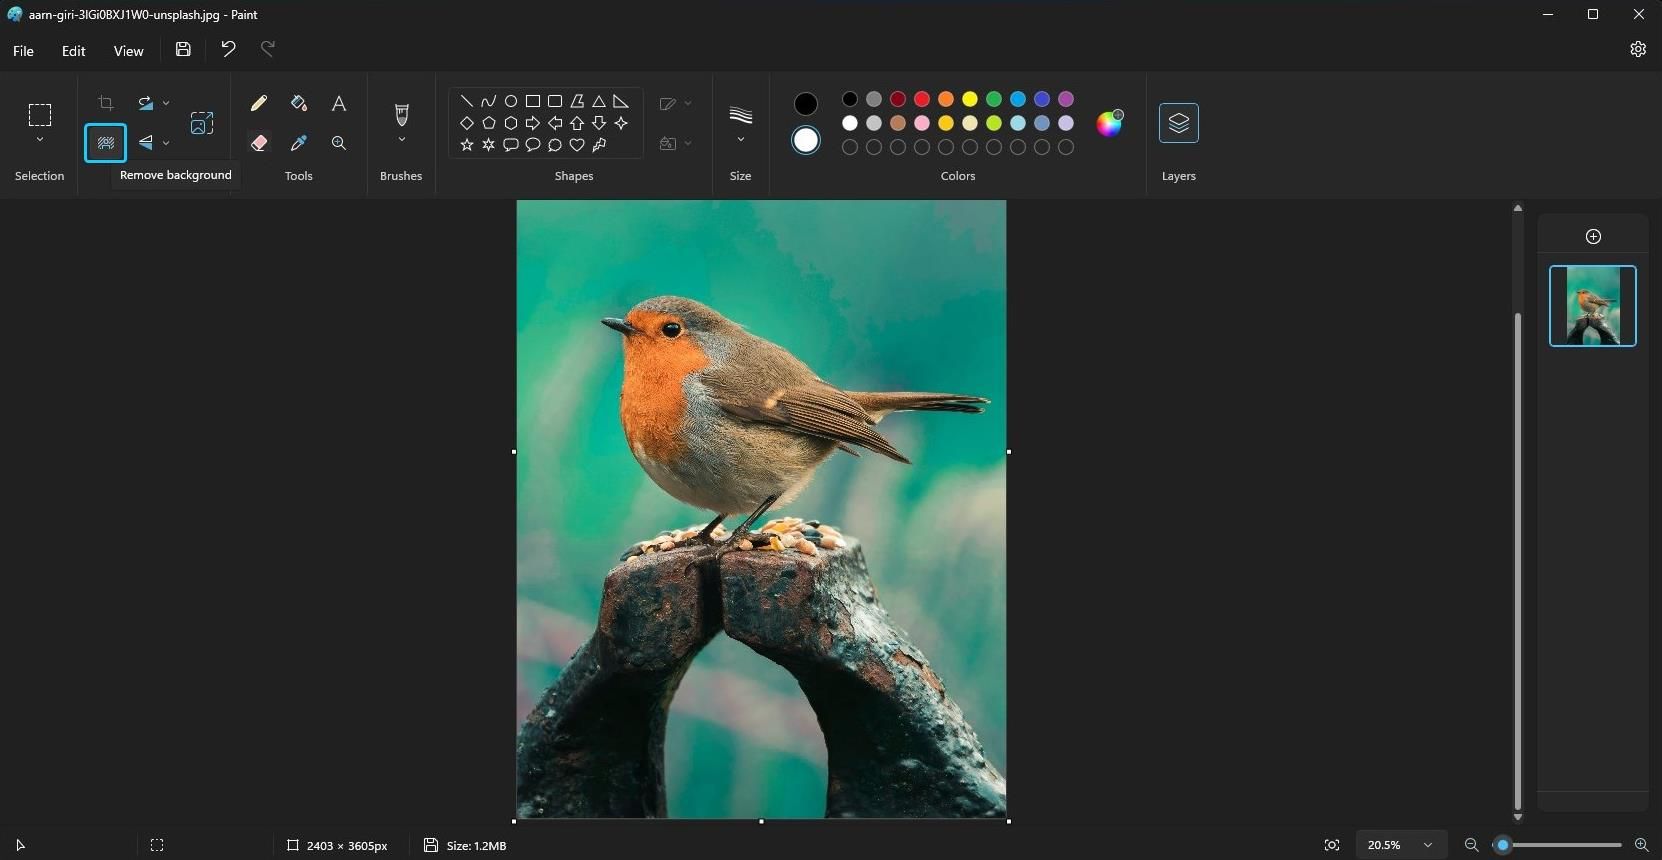 Microsoft Paint App With a Bird Image and Remove Background Option Selected in Windows 11